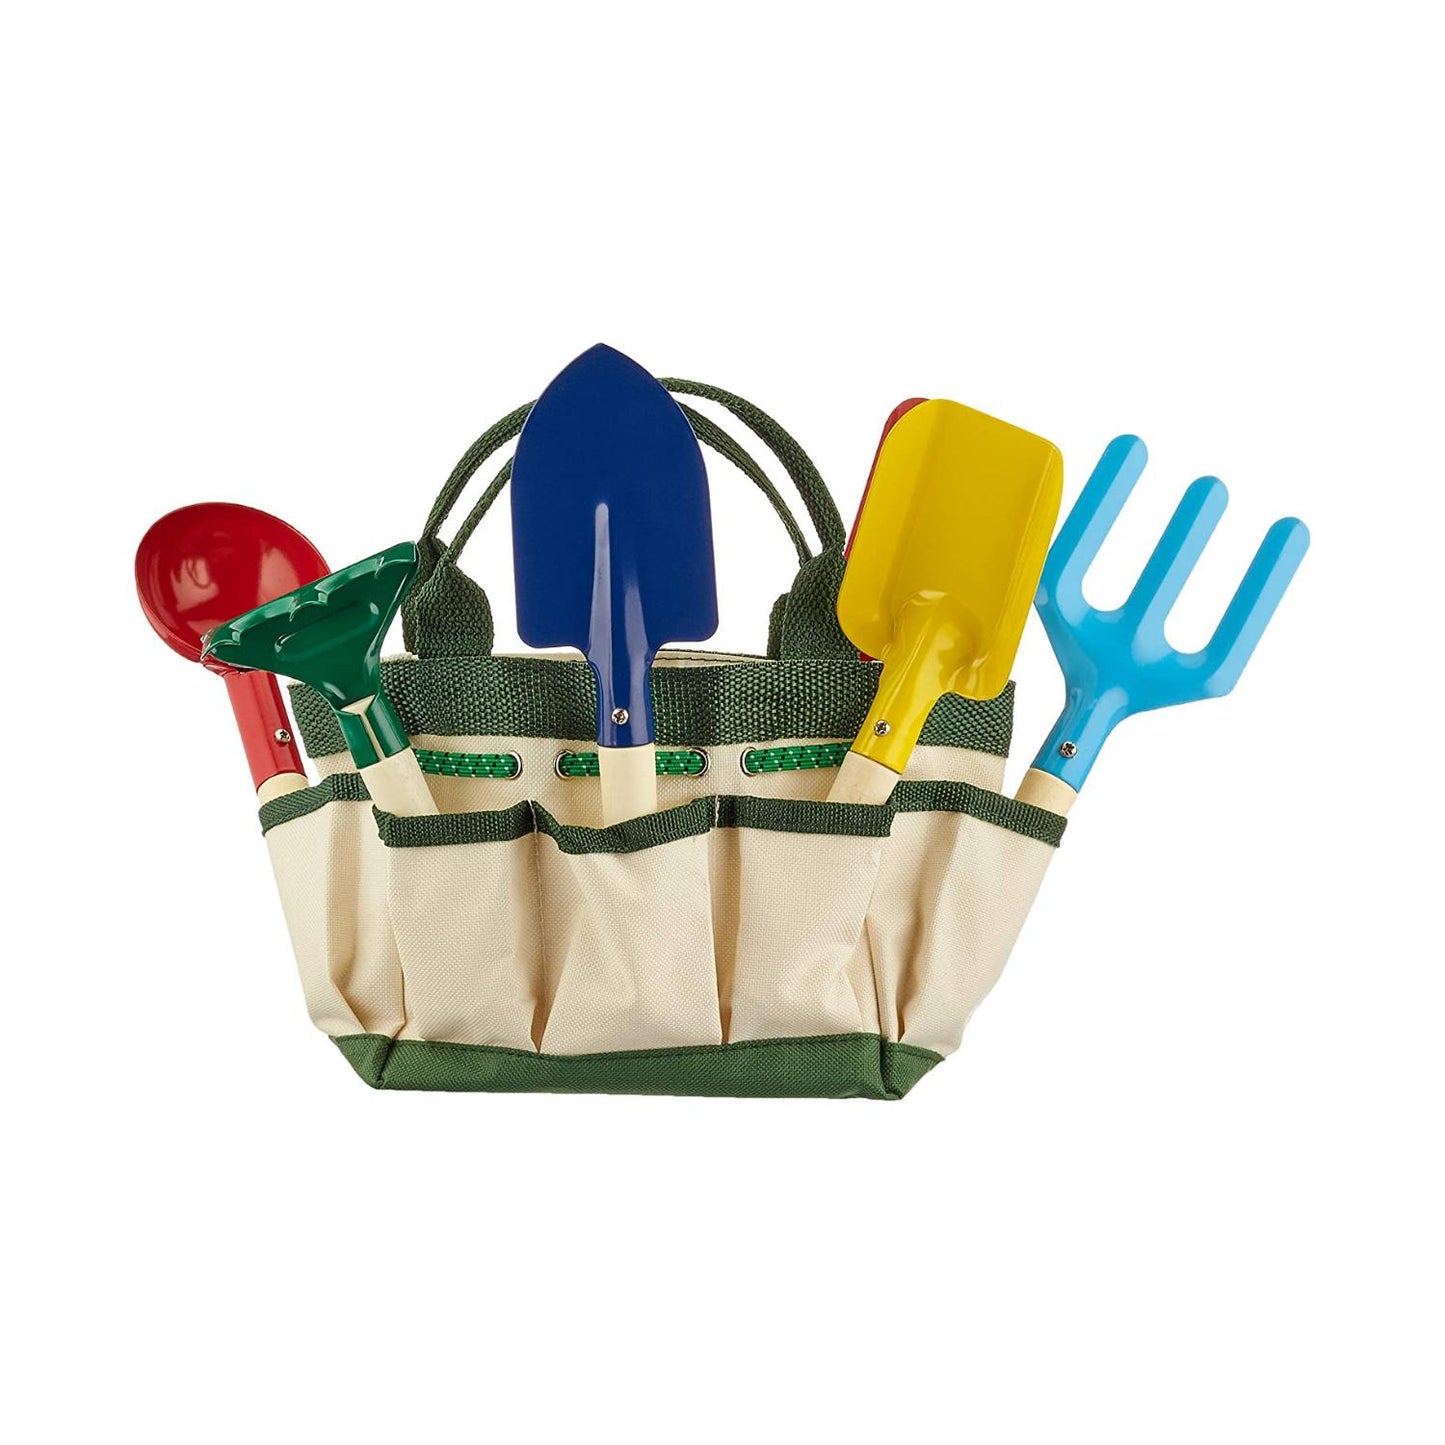 Legler Toys Kids Garden Tools or Beach Toy Set with Carry Bag | Outdoor & Gardening | Front View – All Tools in Bag | BeoVERDE.ie